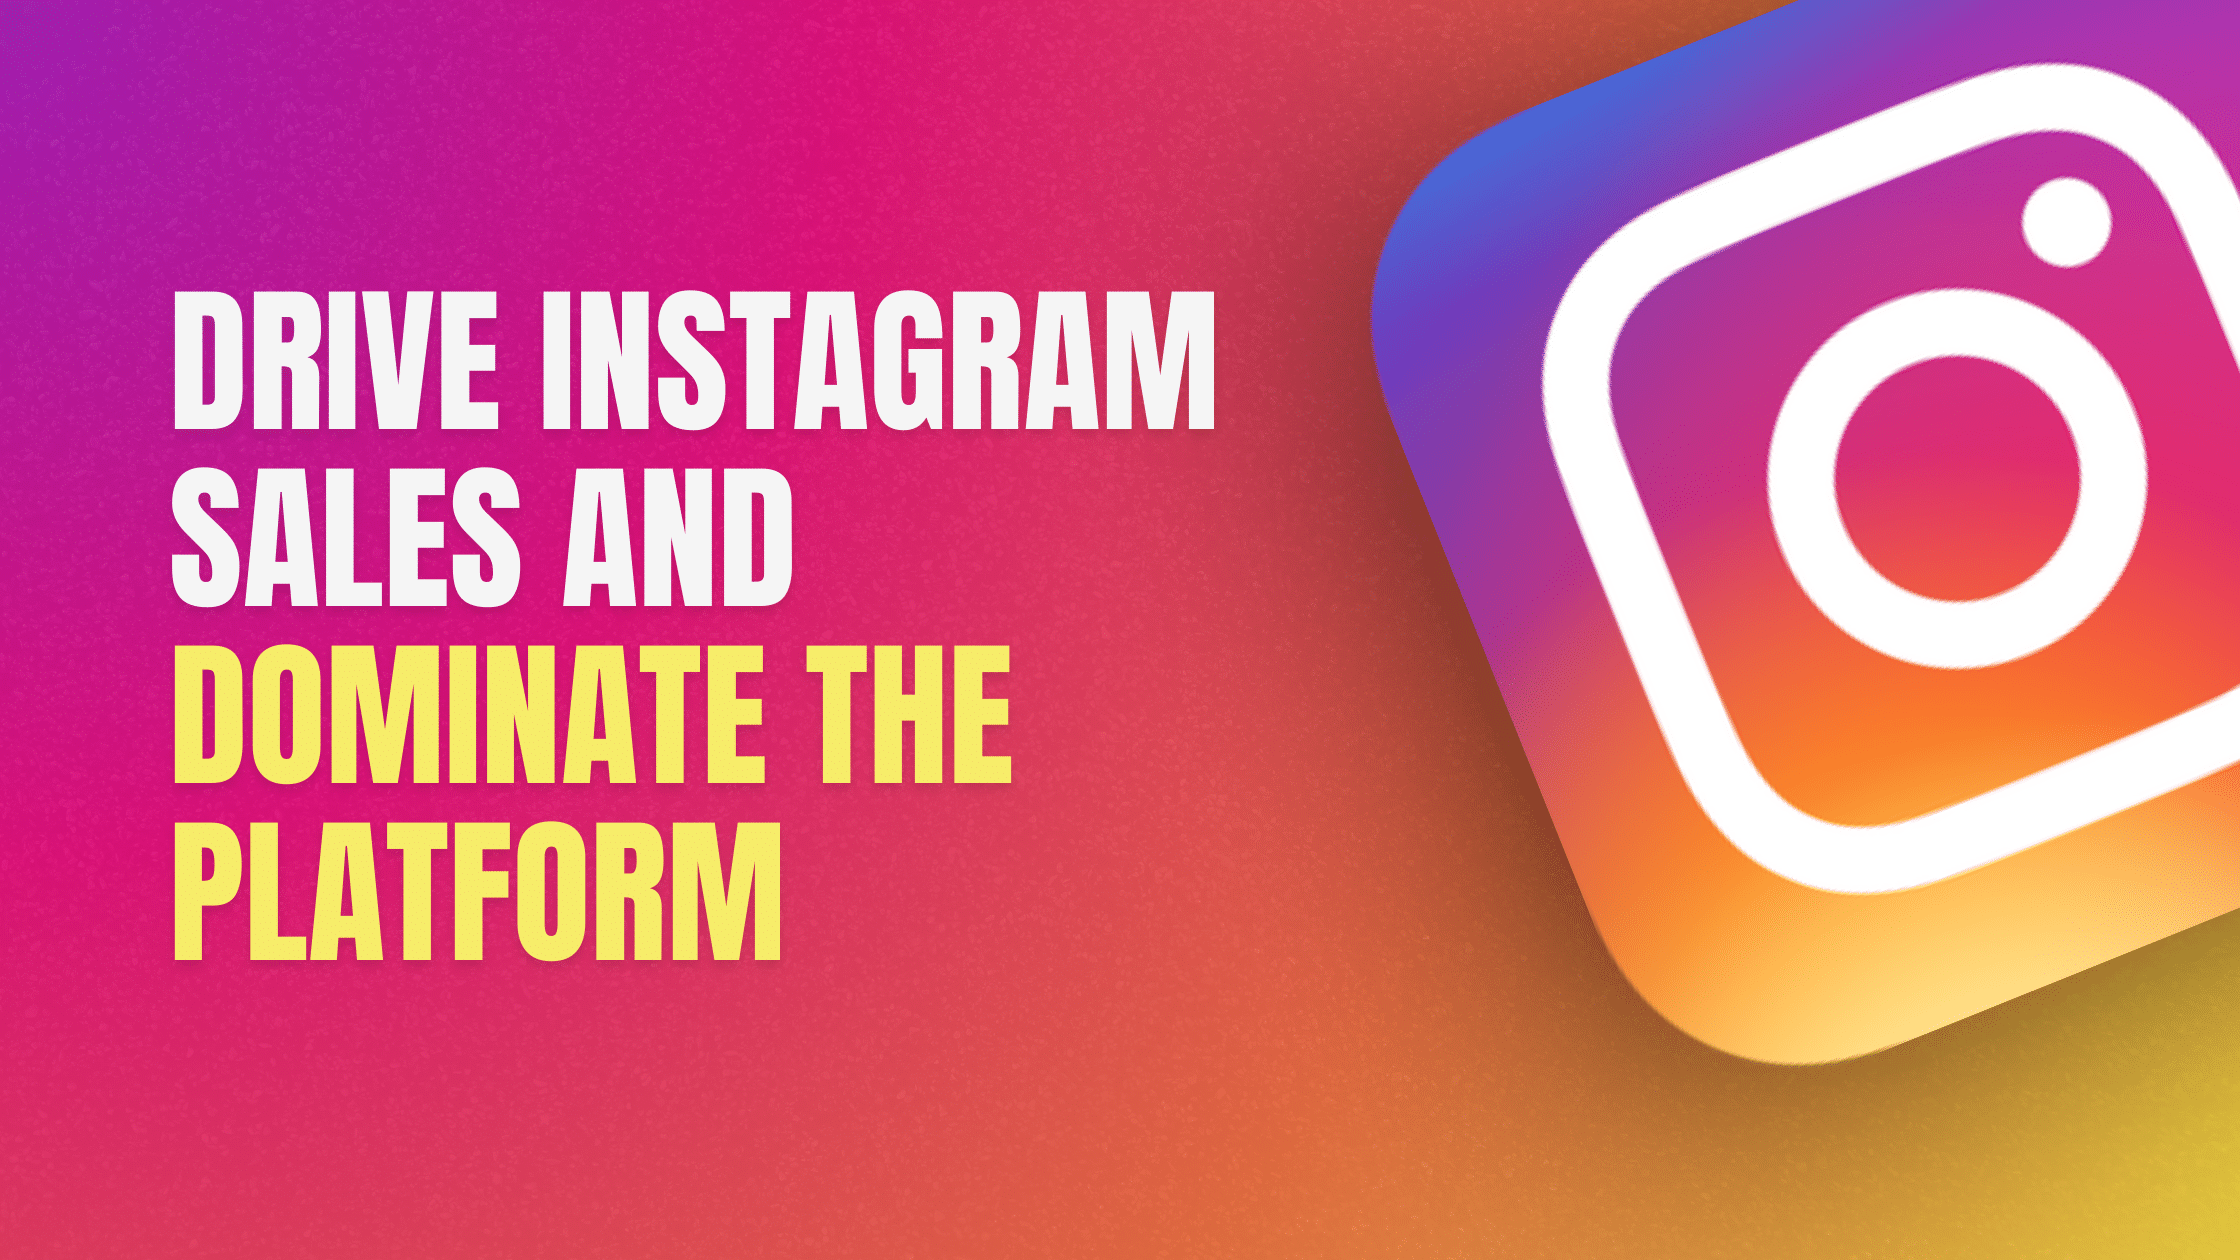 Drive Instagram Sales and Dominate The Platform